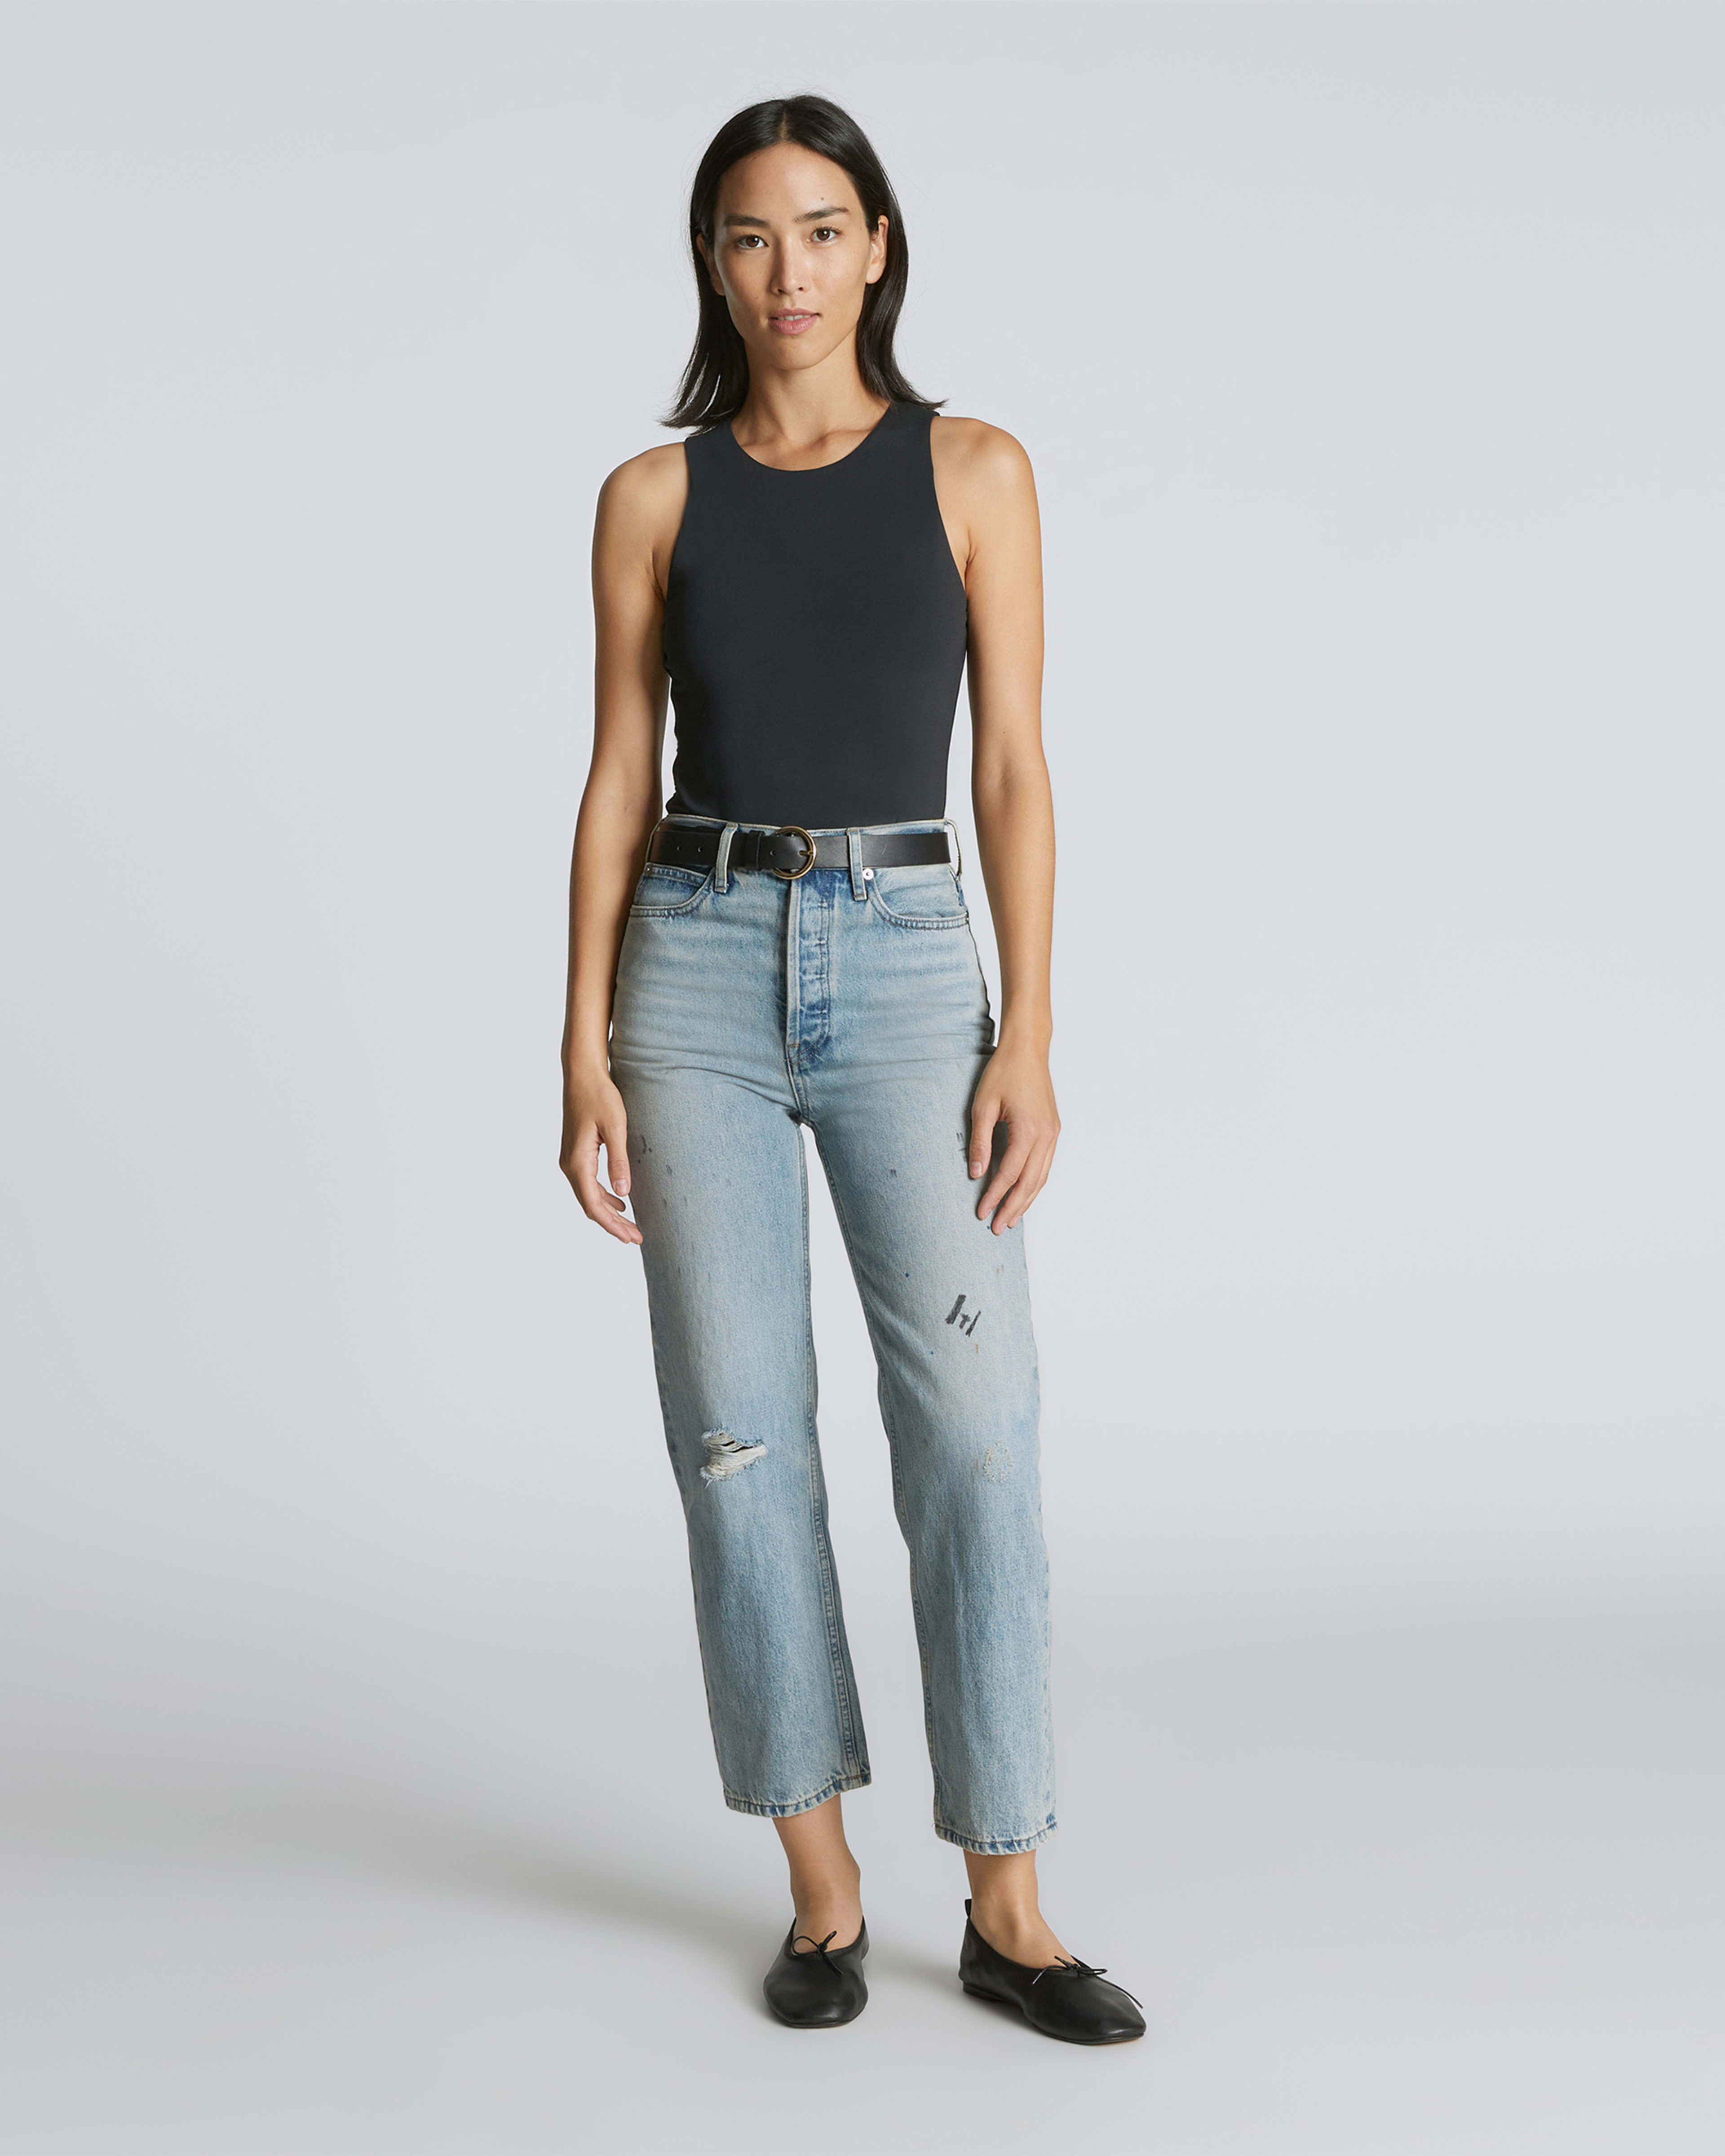 Everything You Need to Know About Everlane Bodysuits (Review)